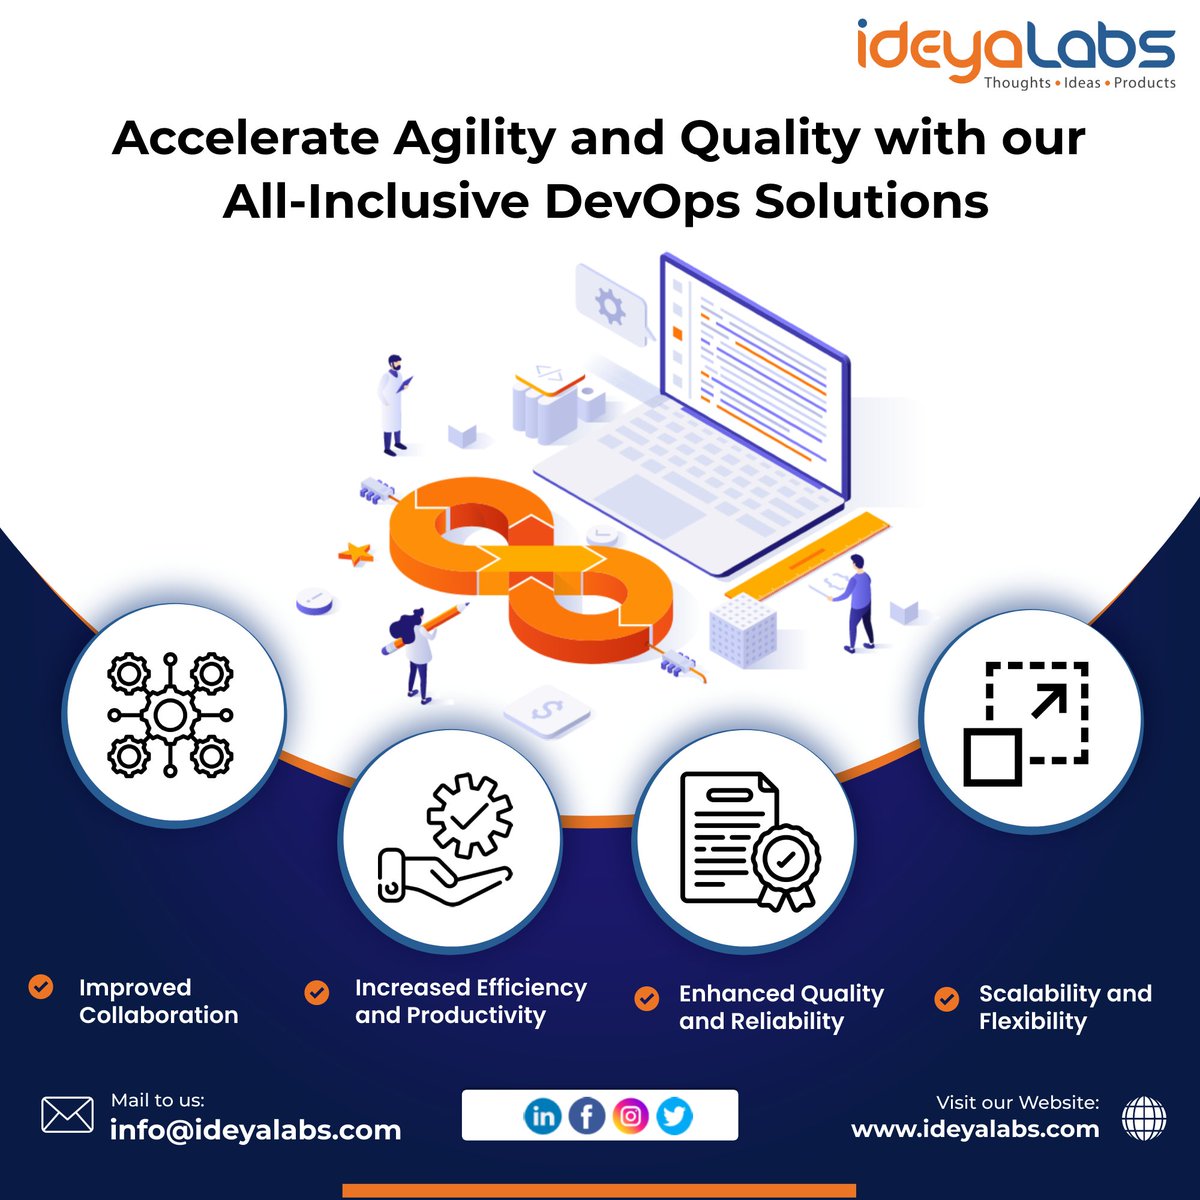 Unleash agility and elevate quality with our comprehensive DevOps solutions. Streamline your development process, foster collaboration, and automate workflows for faster, more reliable software delivery.

#ideyaLabs #software #security #scalability #devops #quality